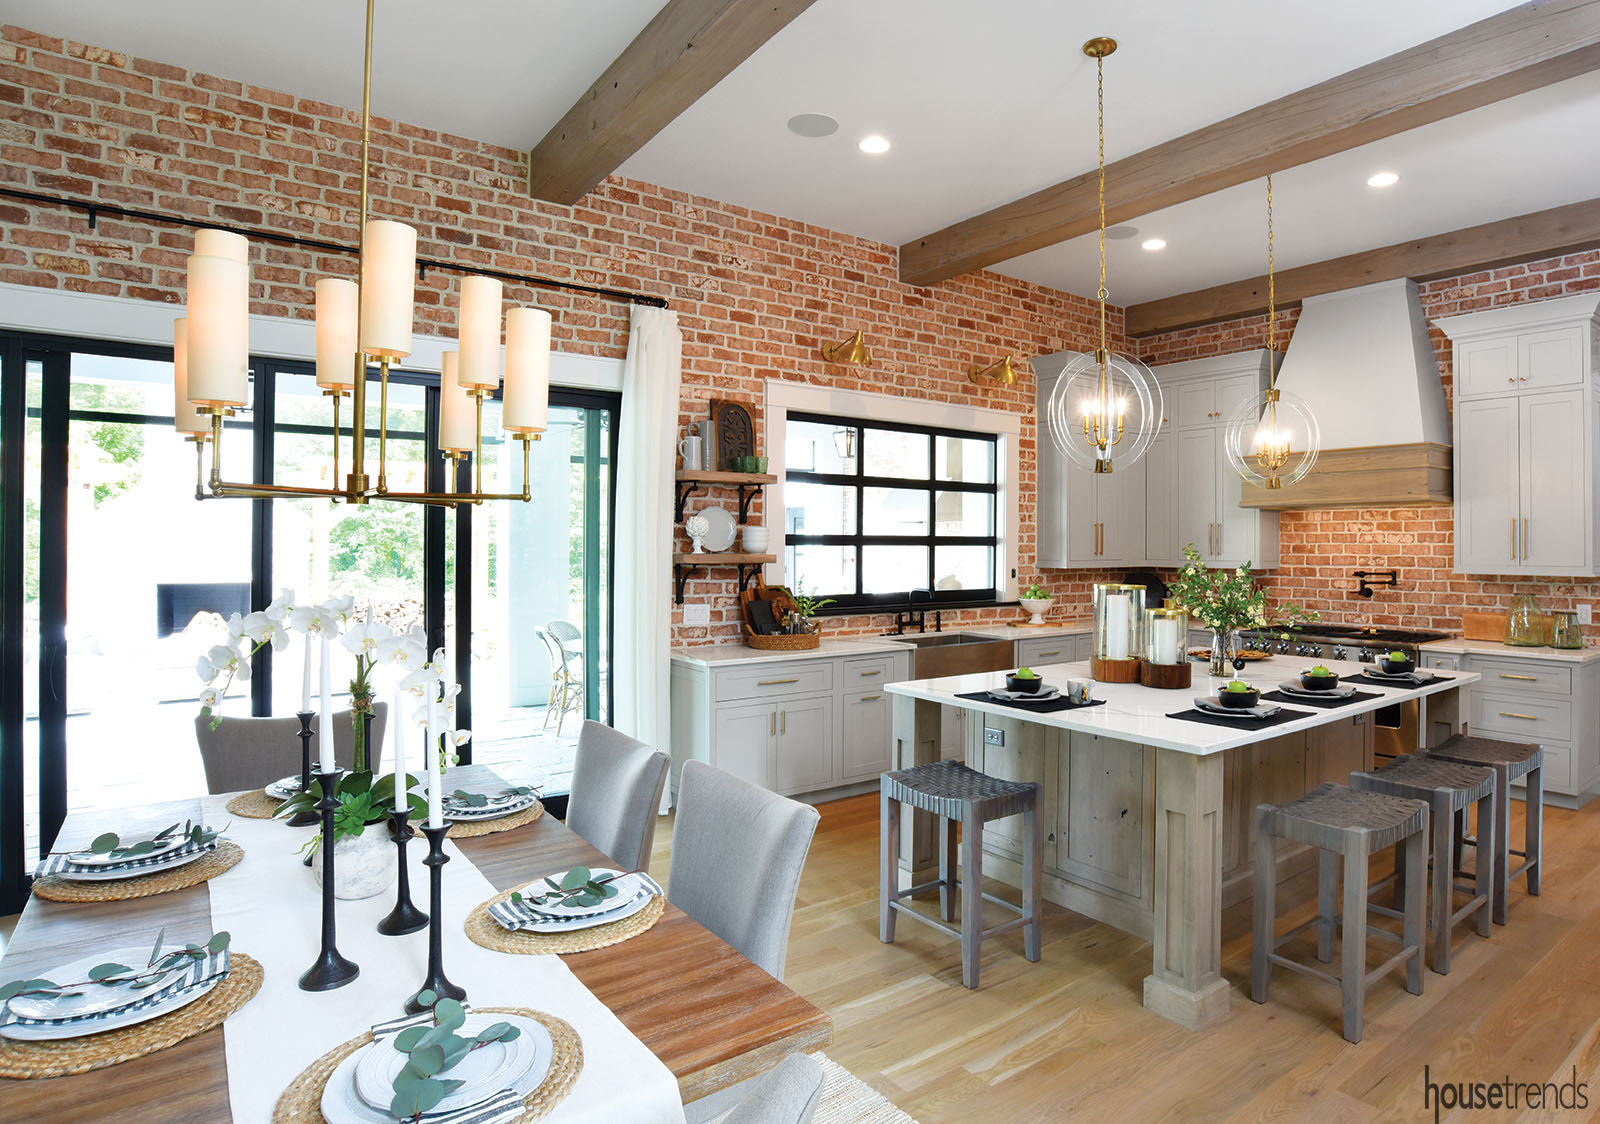 Exposed brick creates an industrial vibe